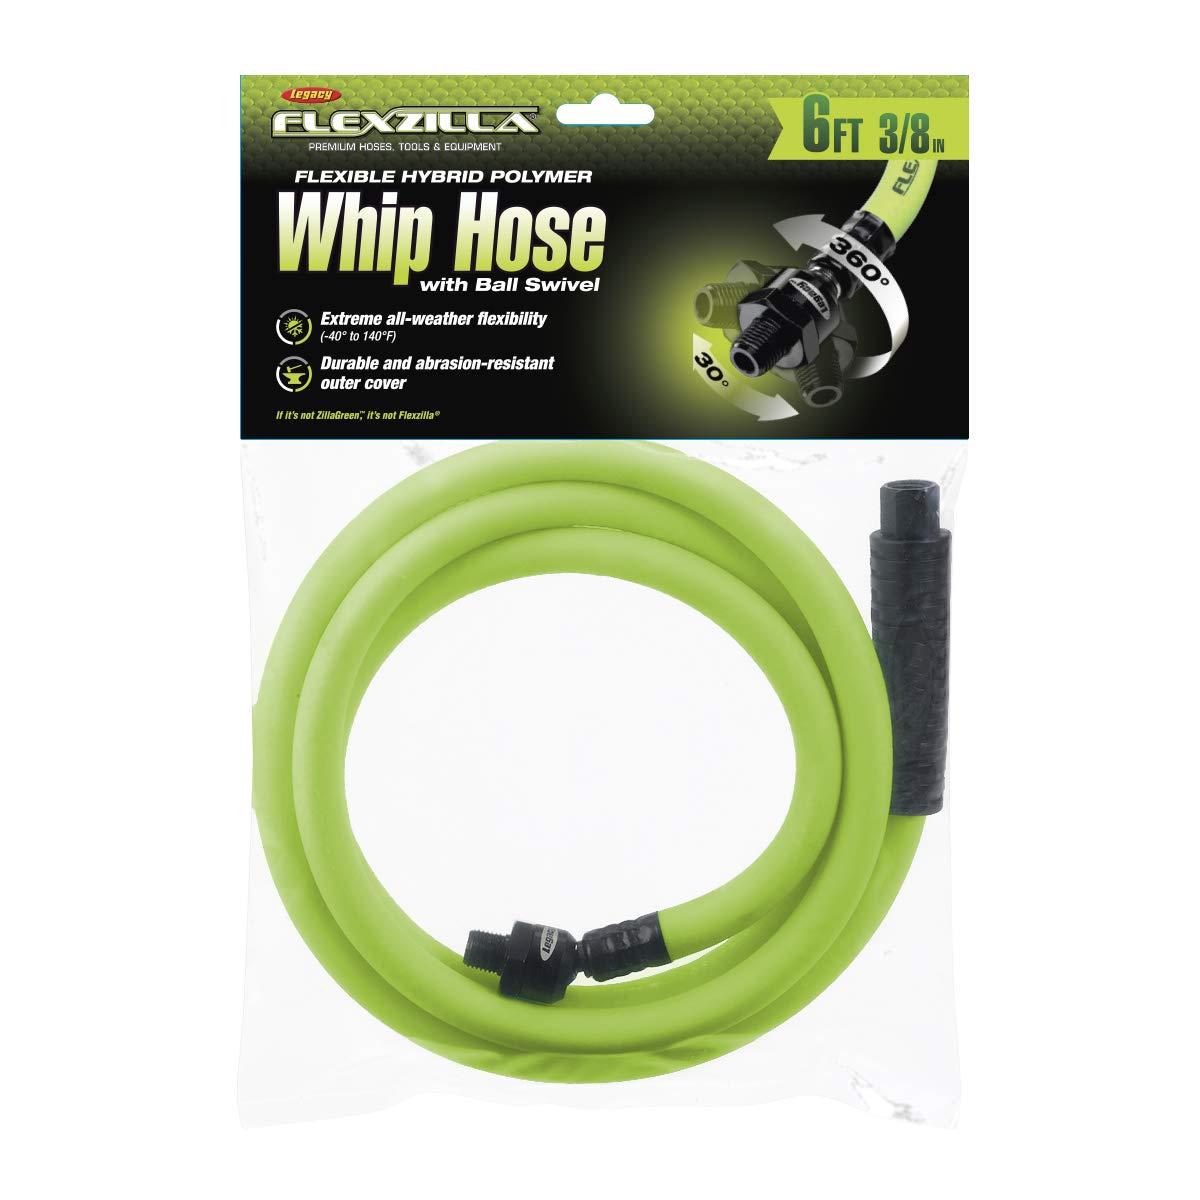 Flexzilla 3/8" x 6' FT Air Hose Whip With Ball Swivel 300PSI Working Pressure